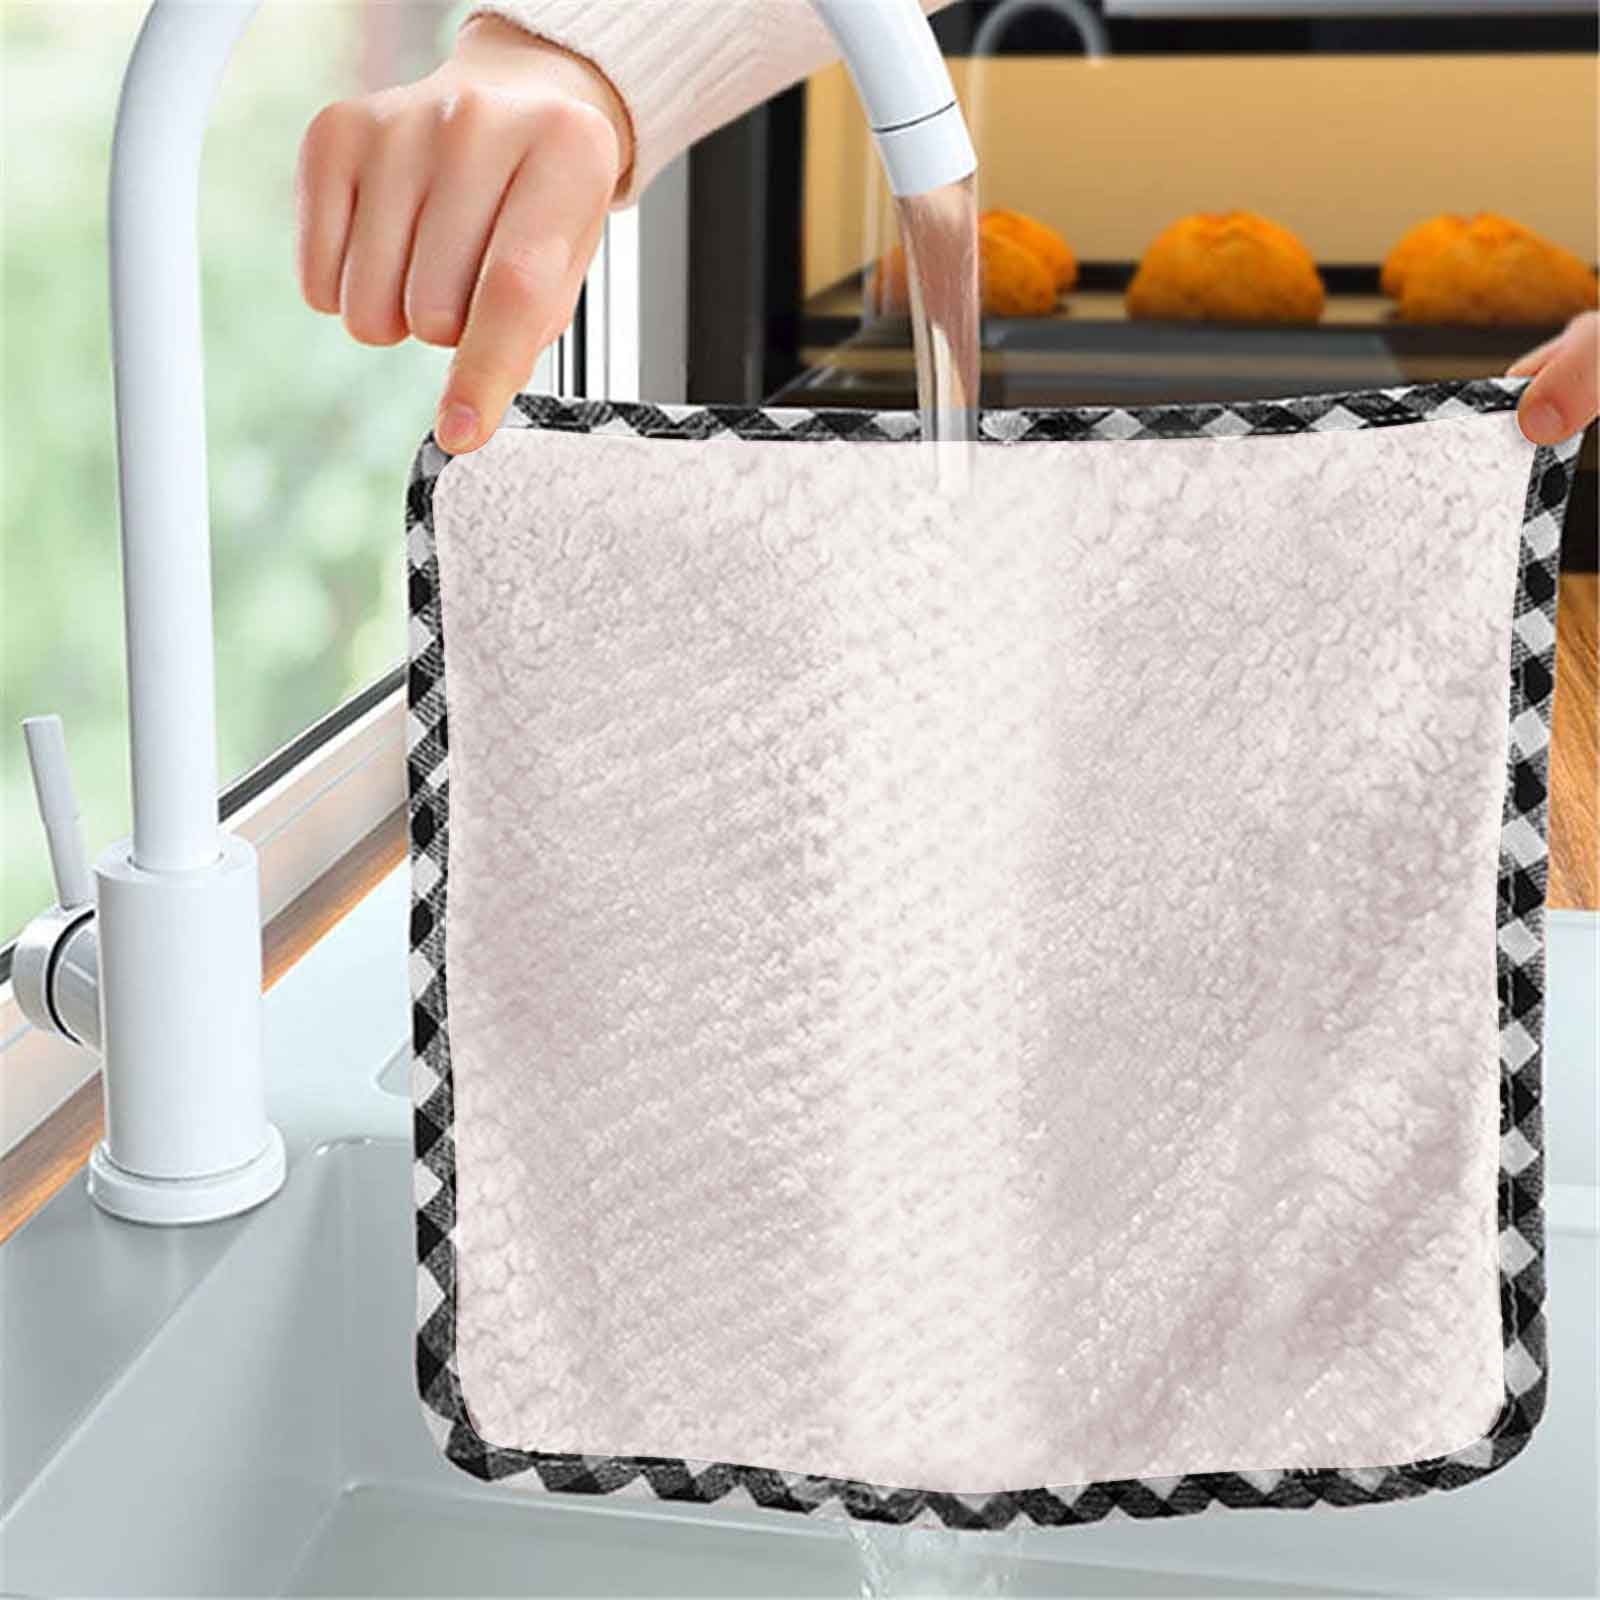 2/3/4PCS/SET Cotton Absorbent Rags Hand Towels Non-Stick Oil Rag Kitchen  Accessories Household Cleaning Tools Cleaning Cloth